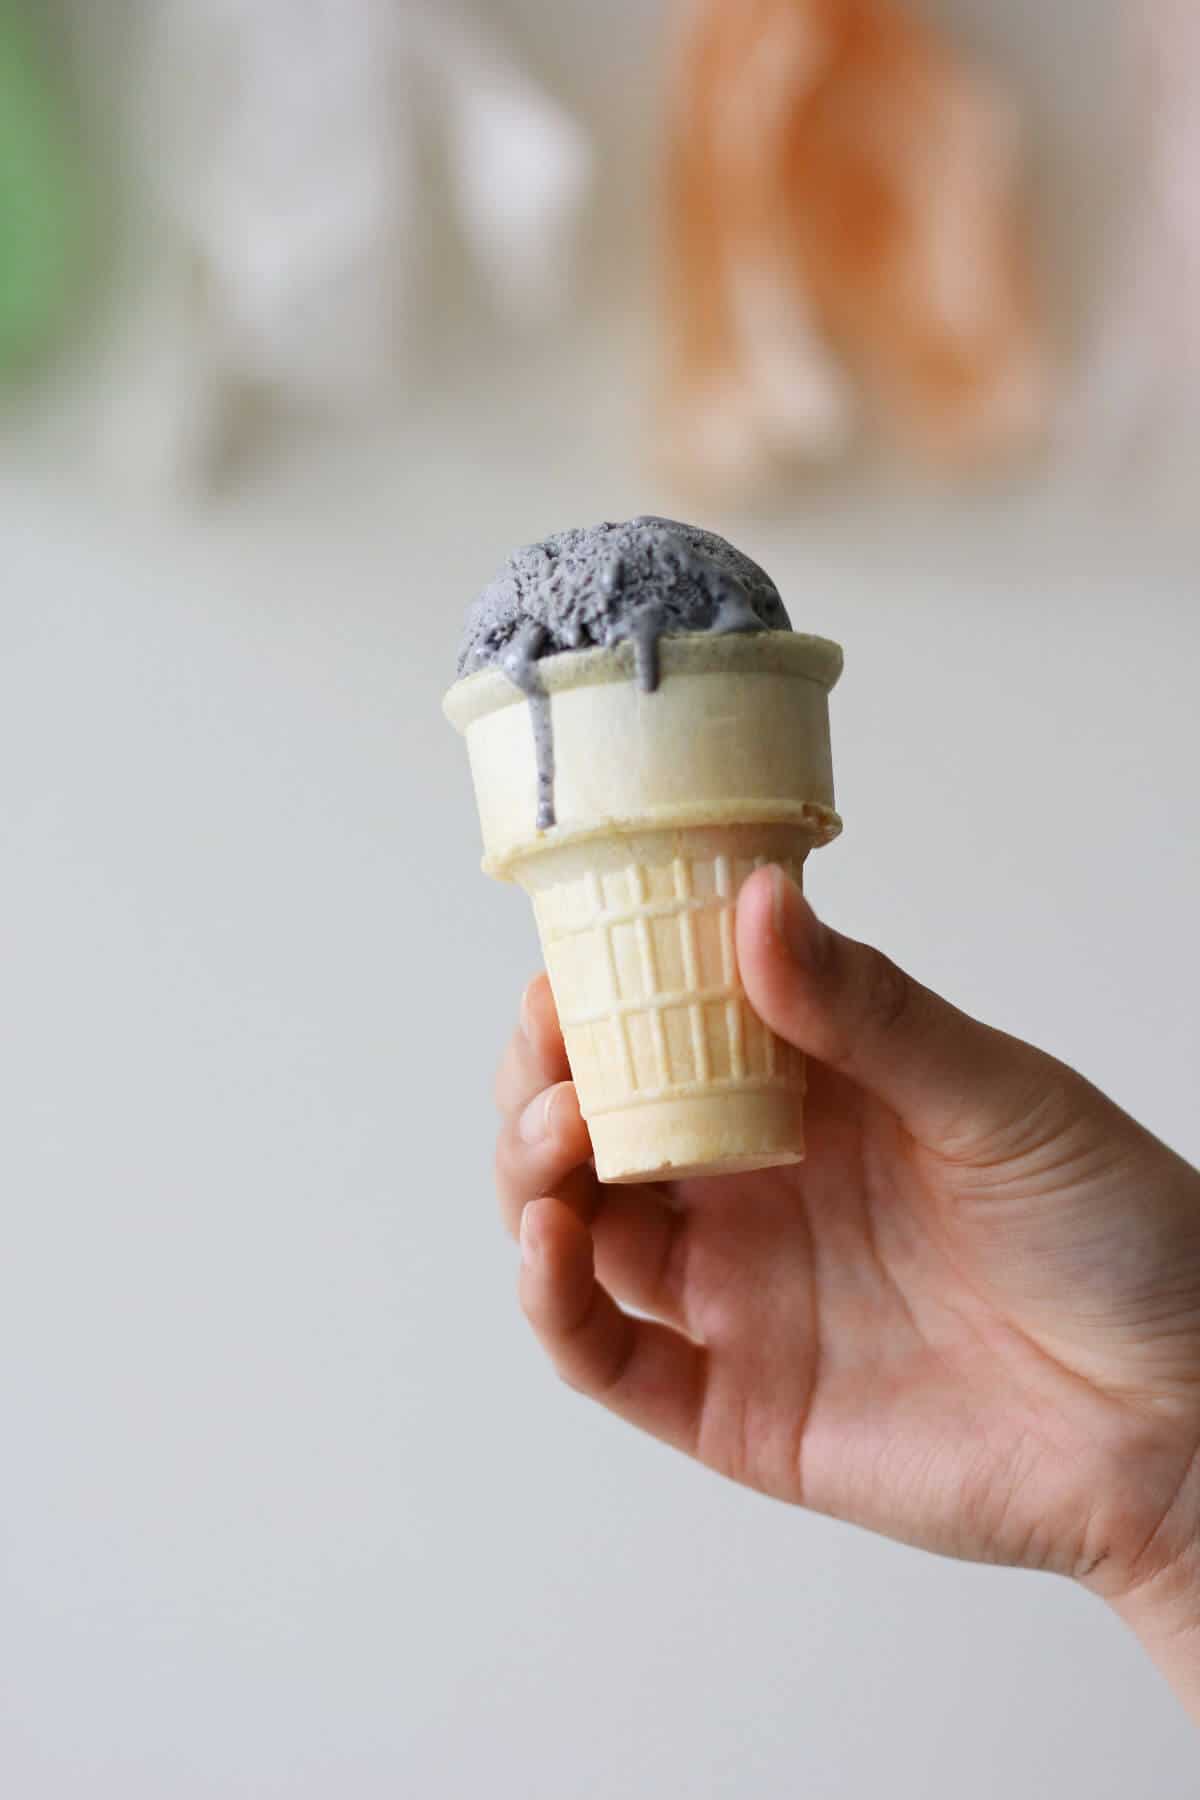 Hand holding cone topped with dark grey colored ice cream scoop.